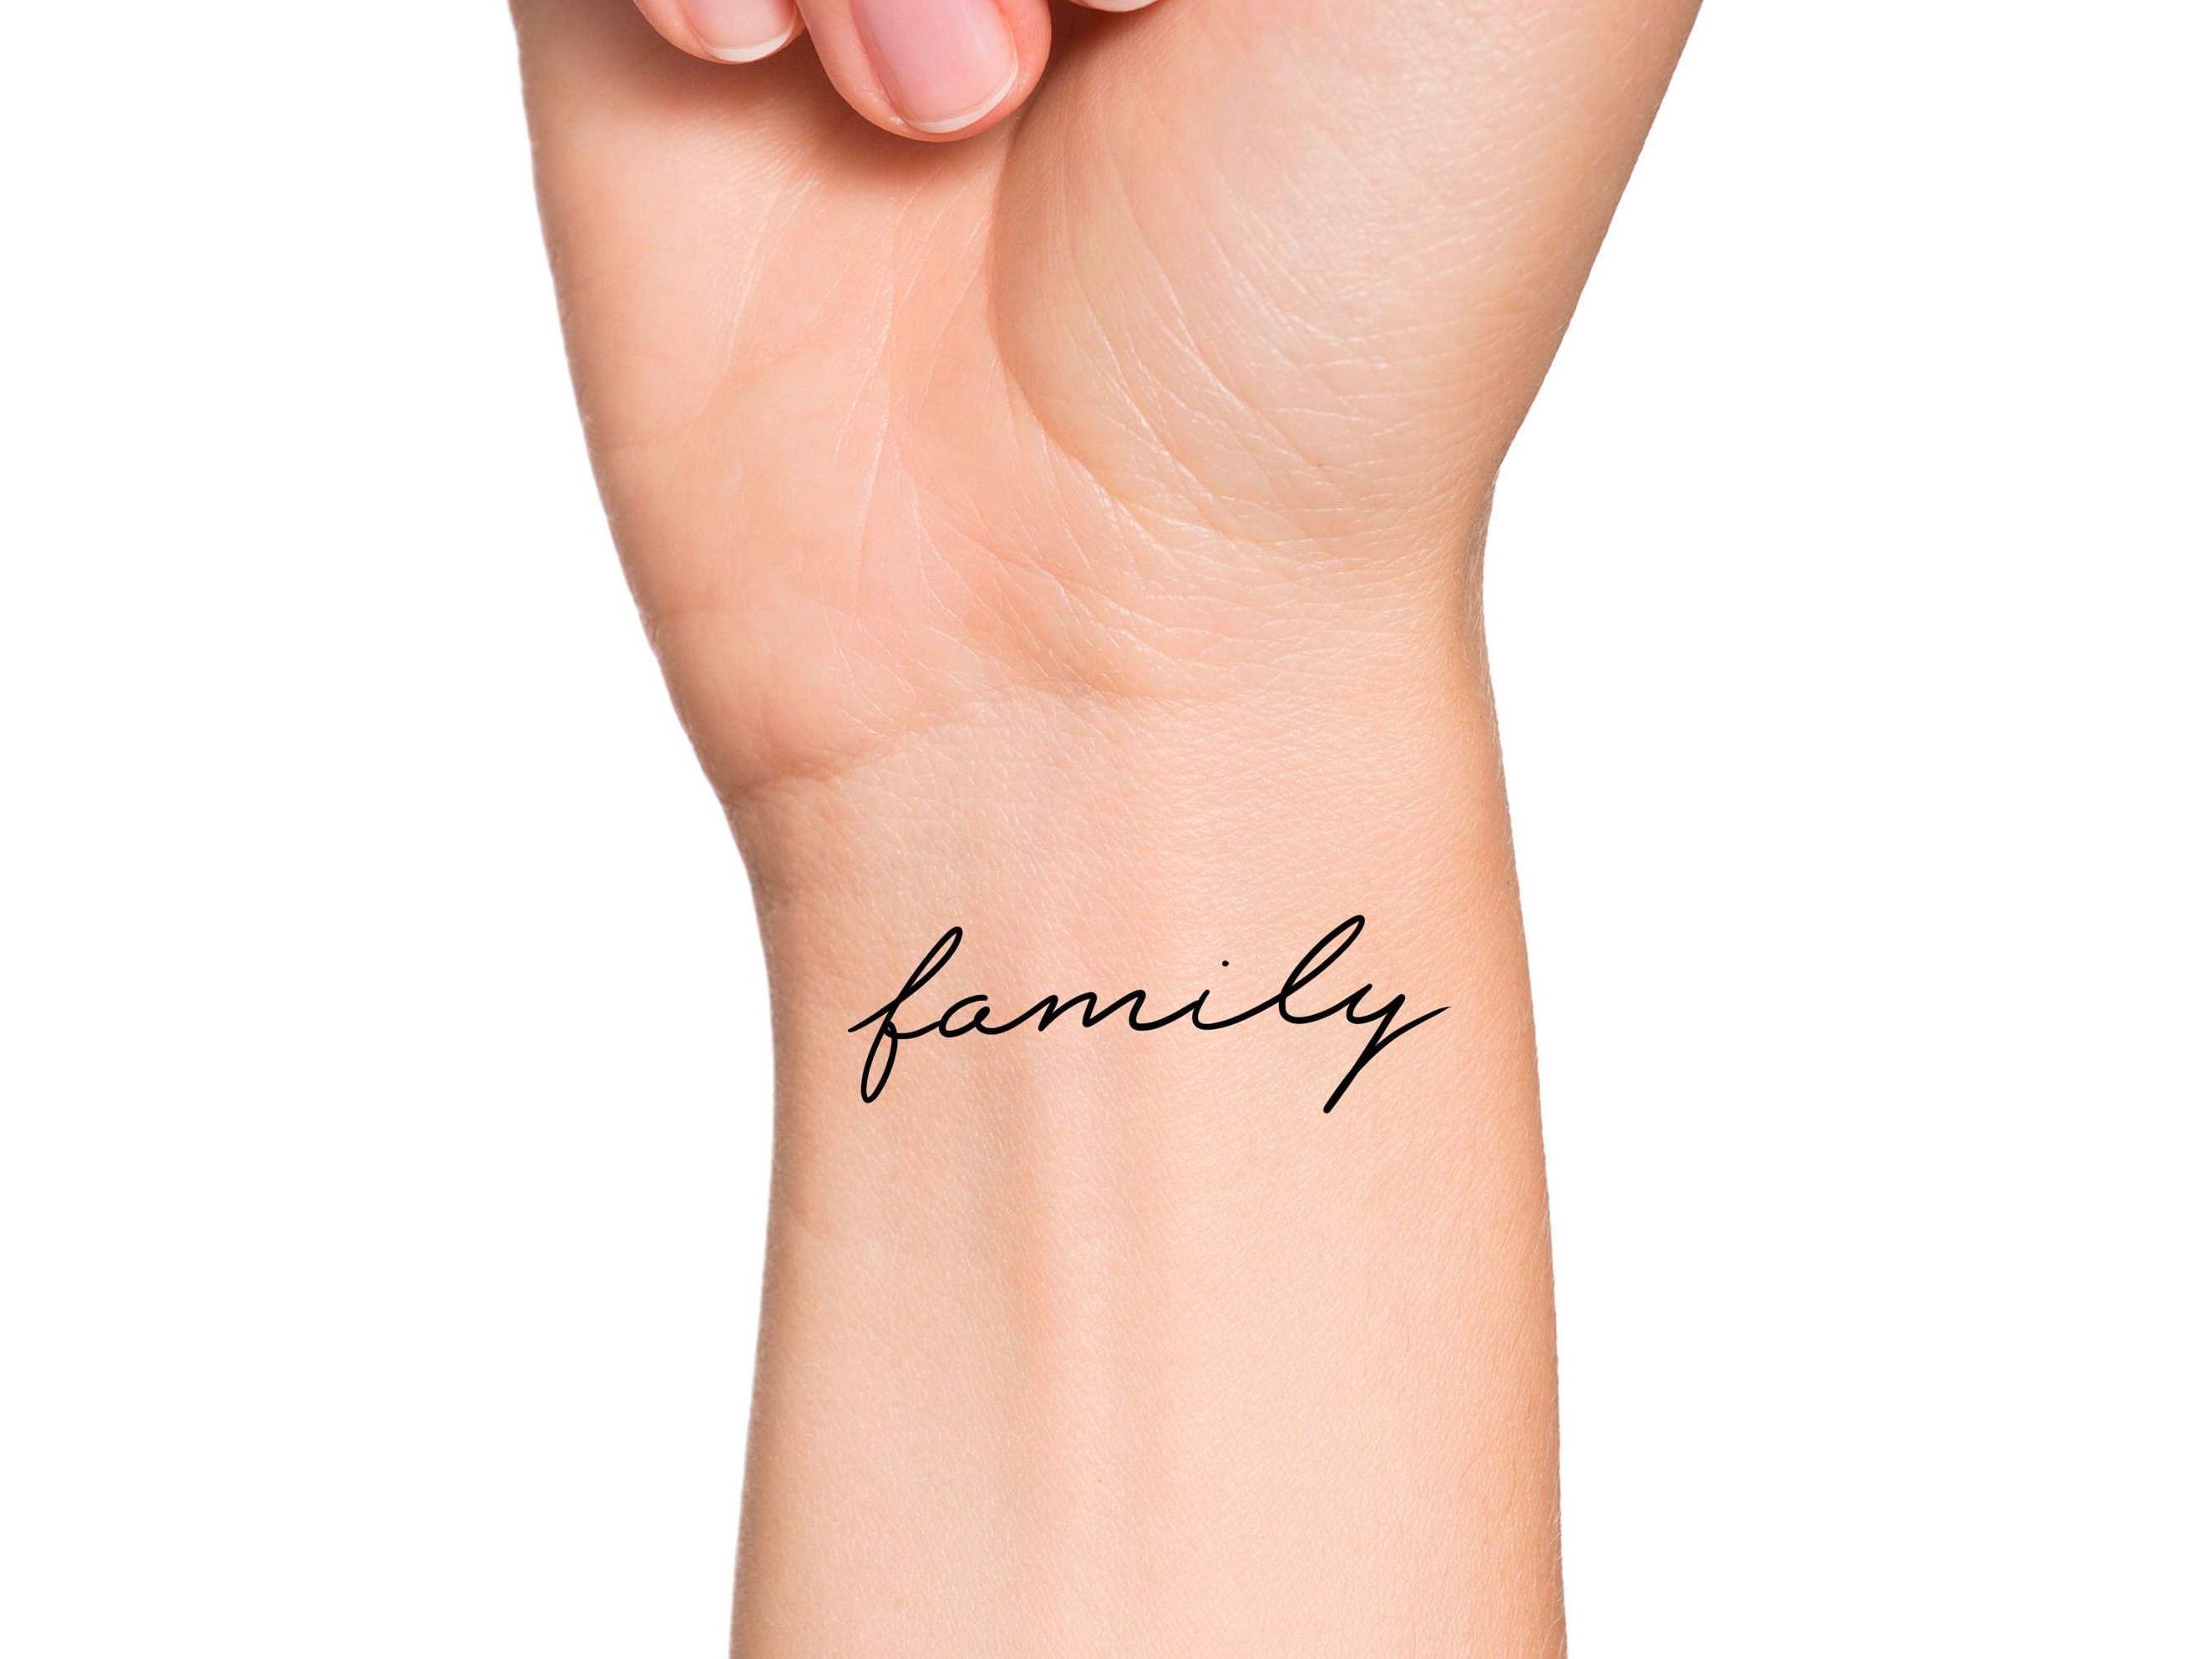 Family Tattoo Designs: Meaningful Ideas for Unbreakable Bonds